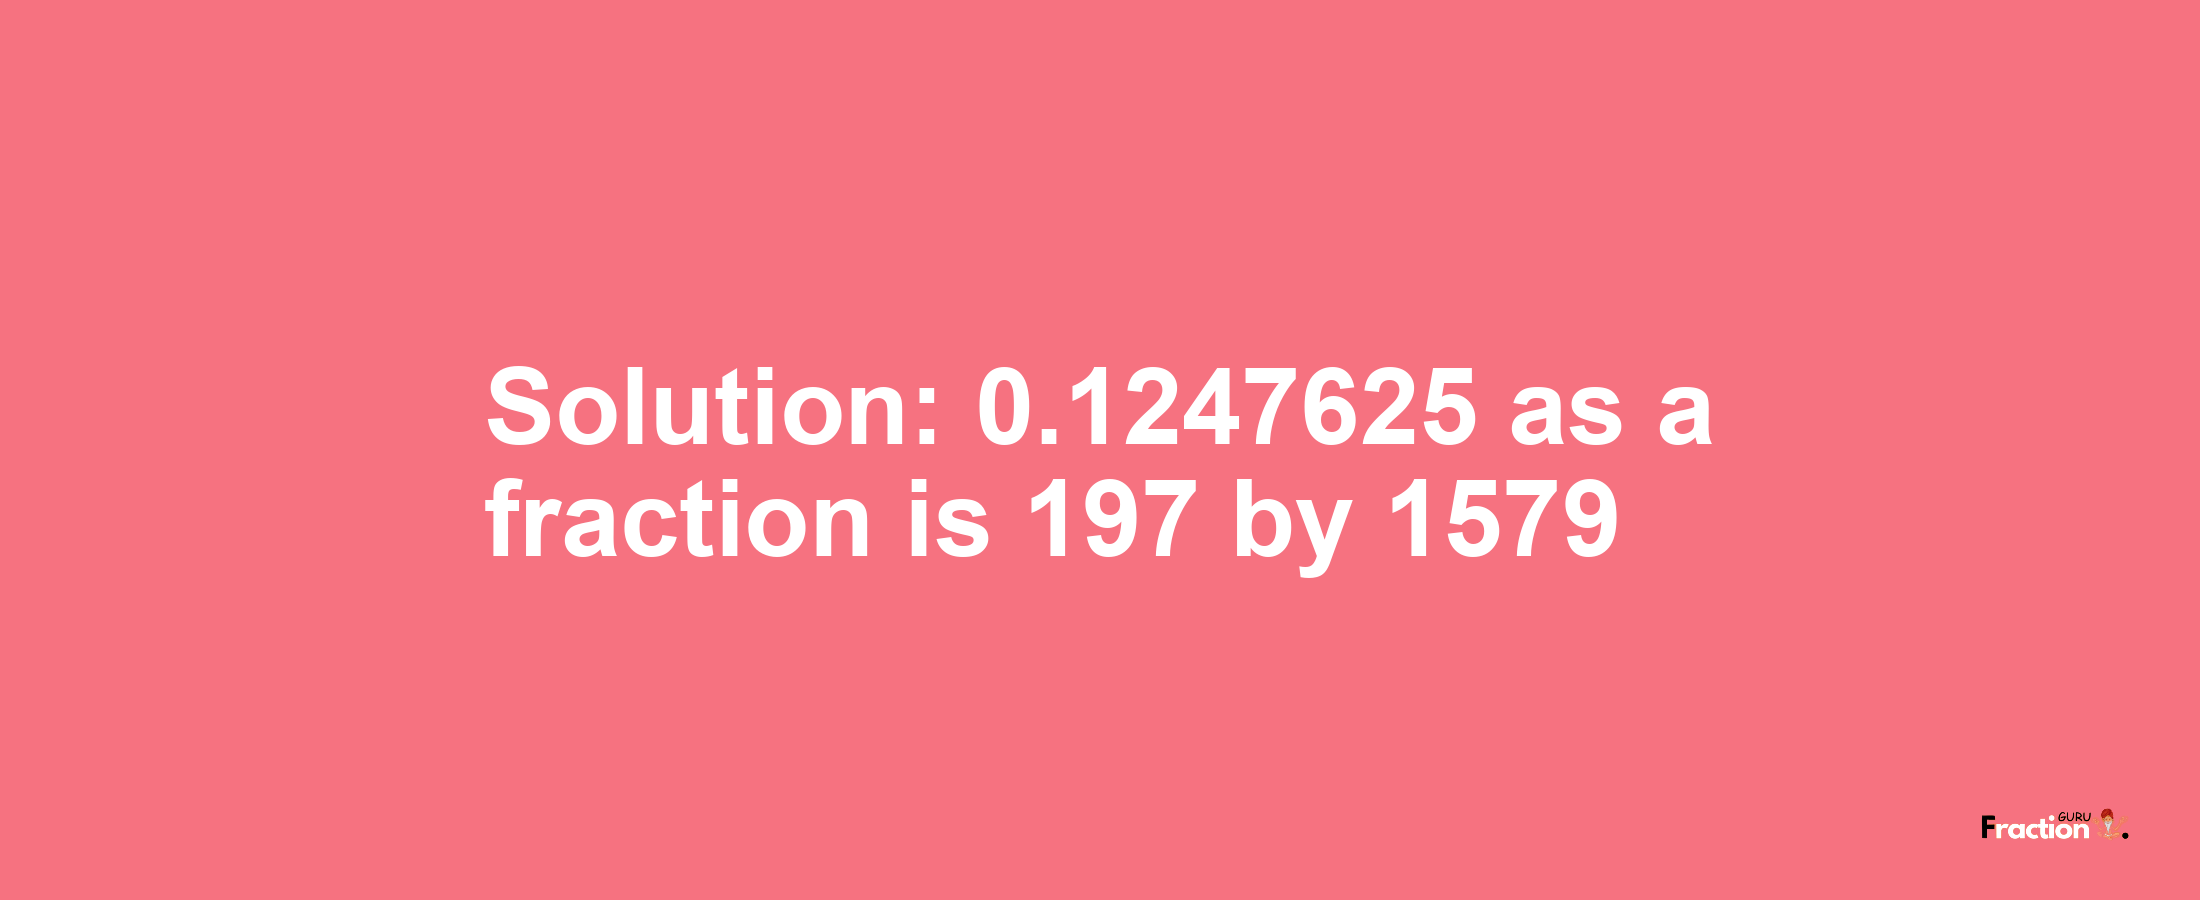 Solution:0.1247625 as a fraction is 197/1579